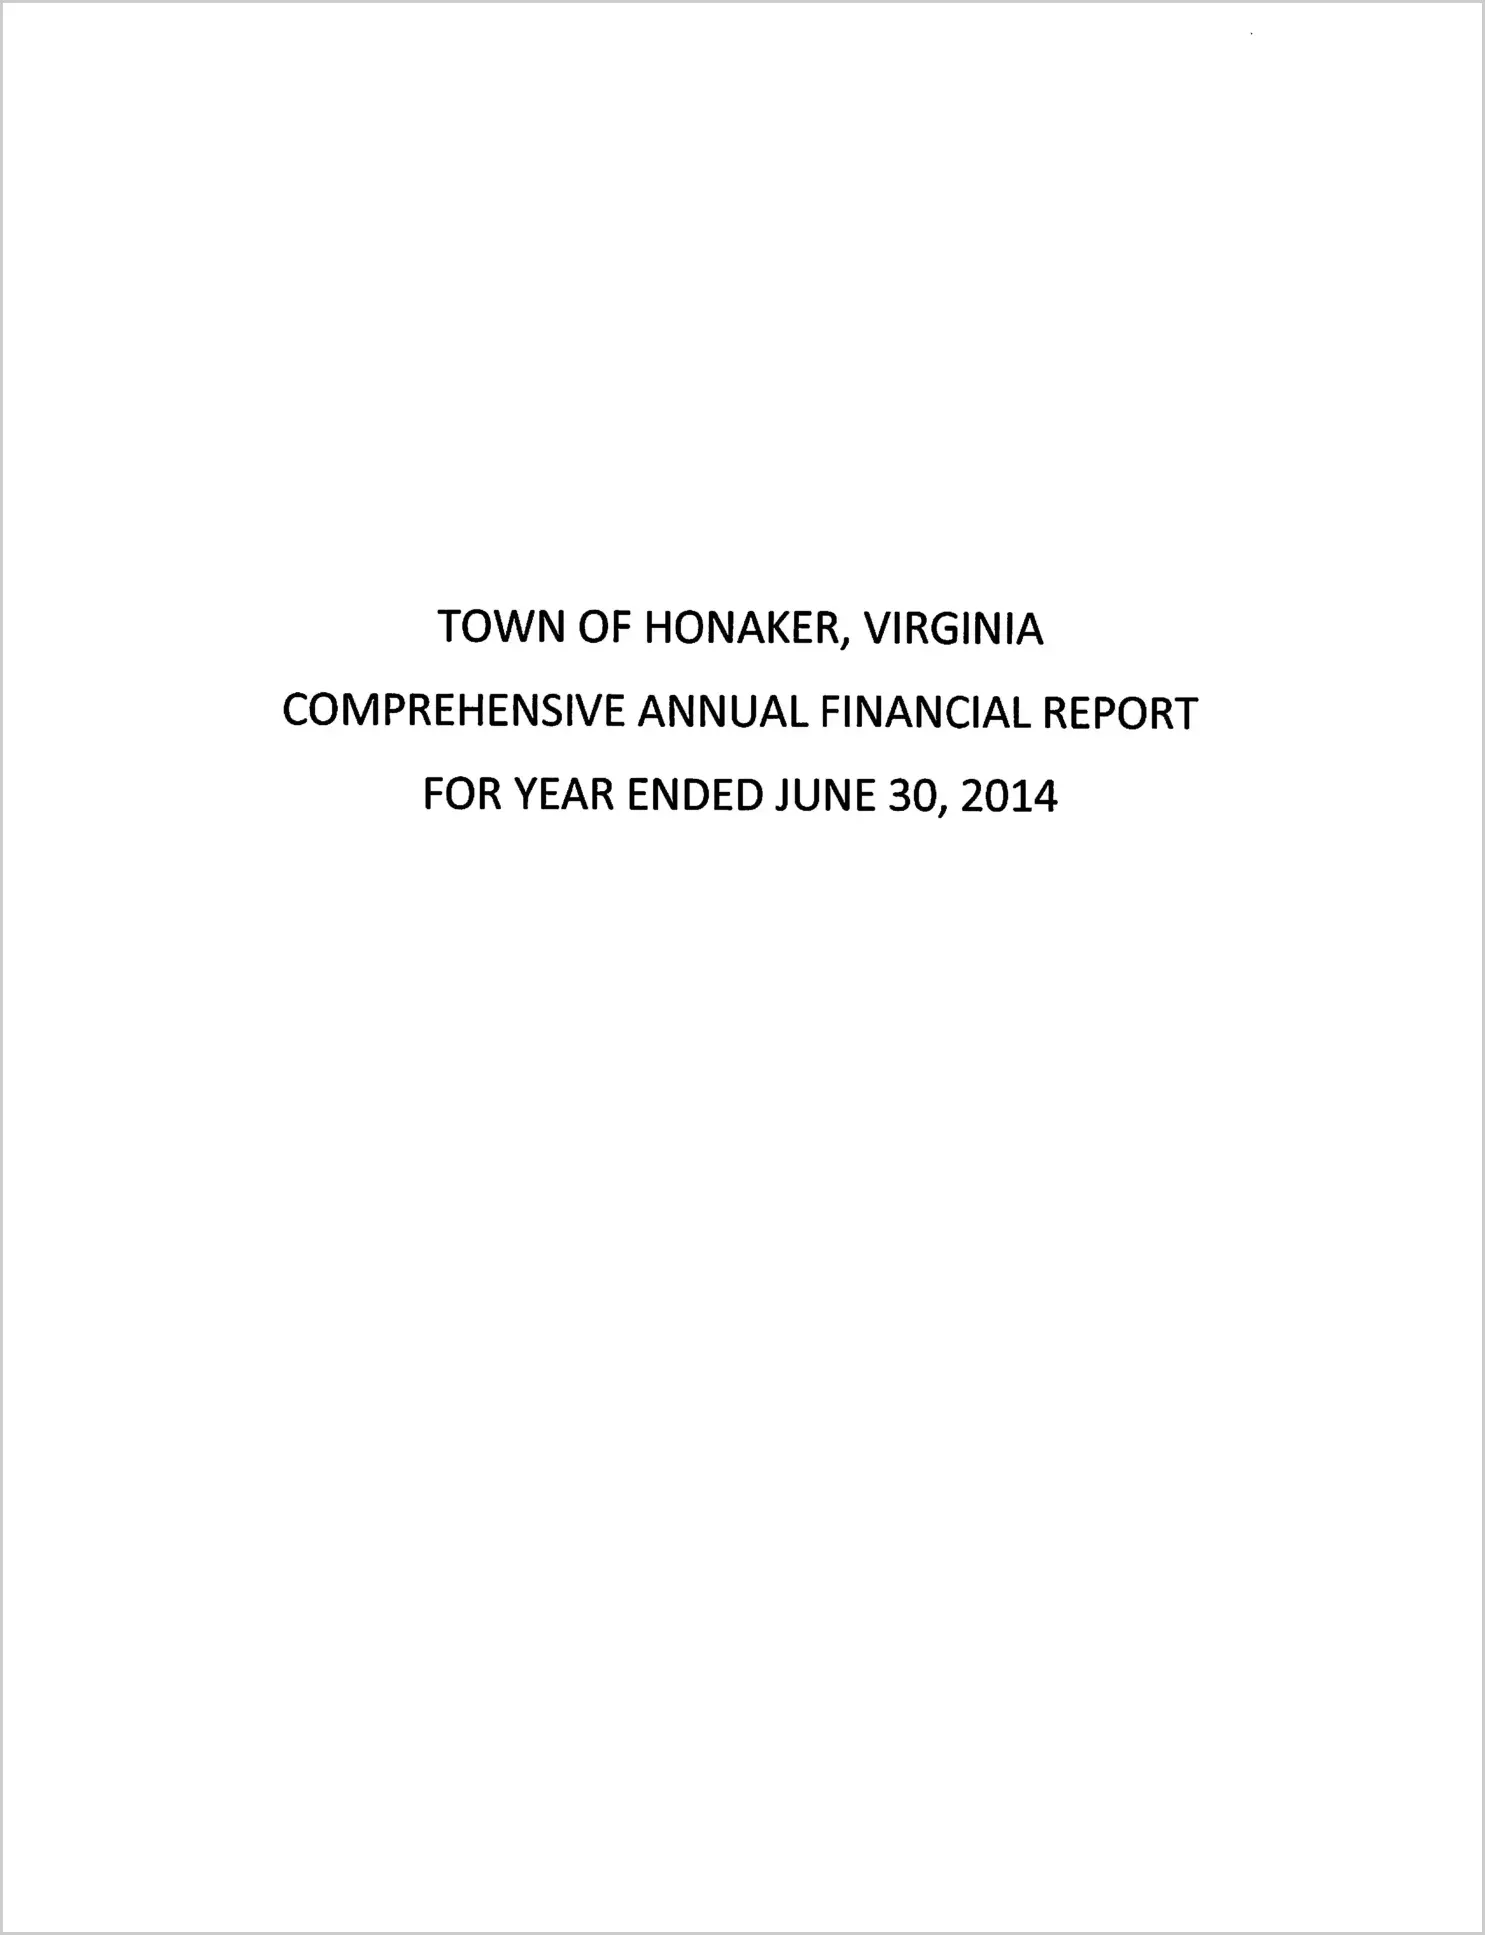 2014 Annual Financial Report for Town of Honaker